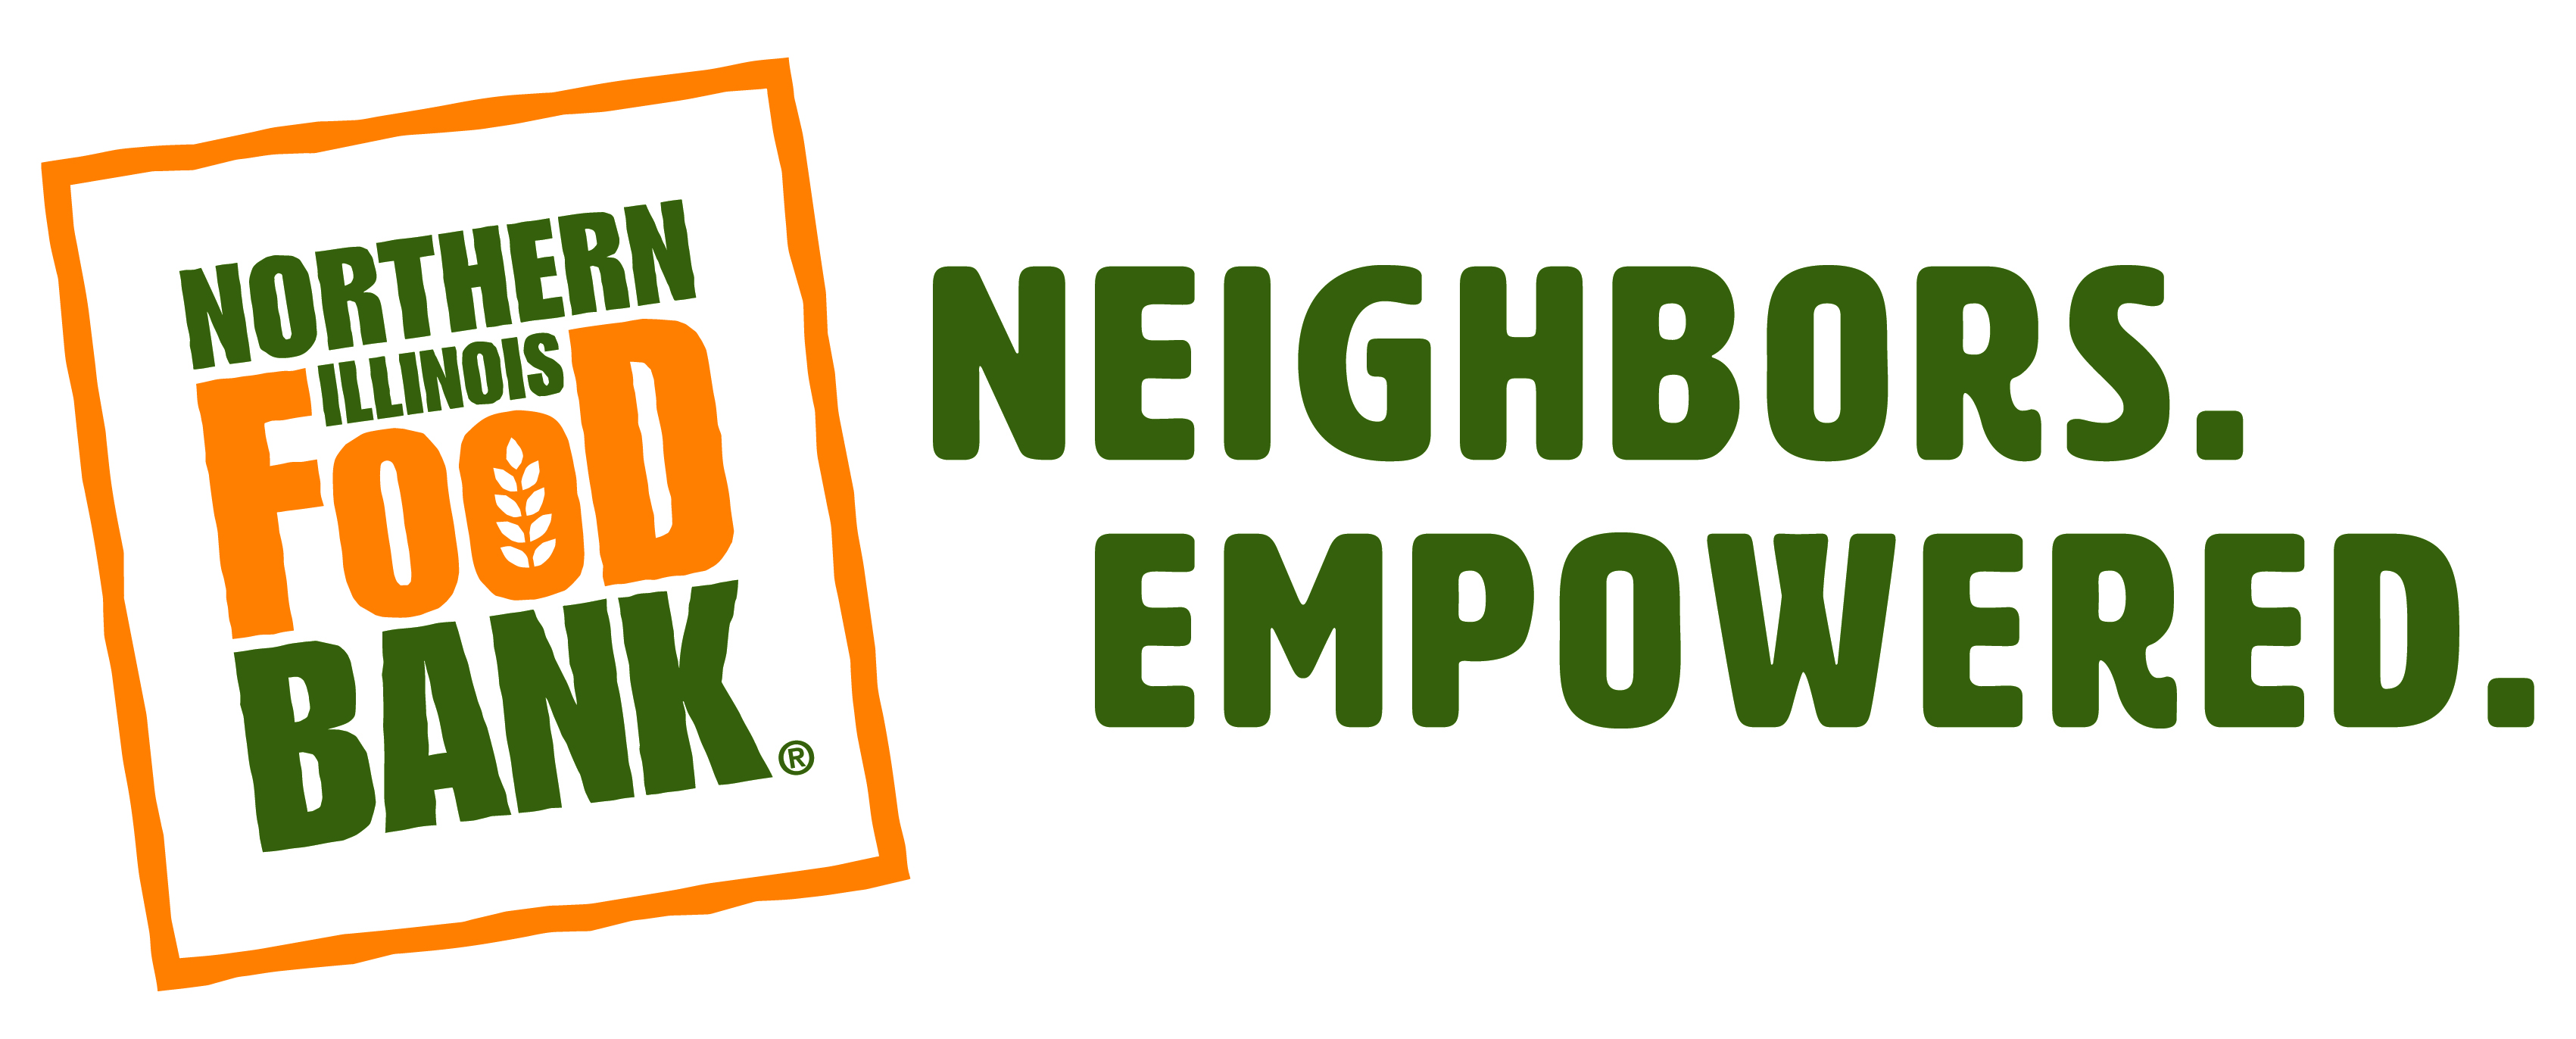 Northern IL food bank. Neighbors. Empowered.